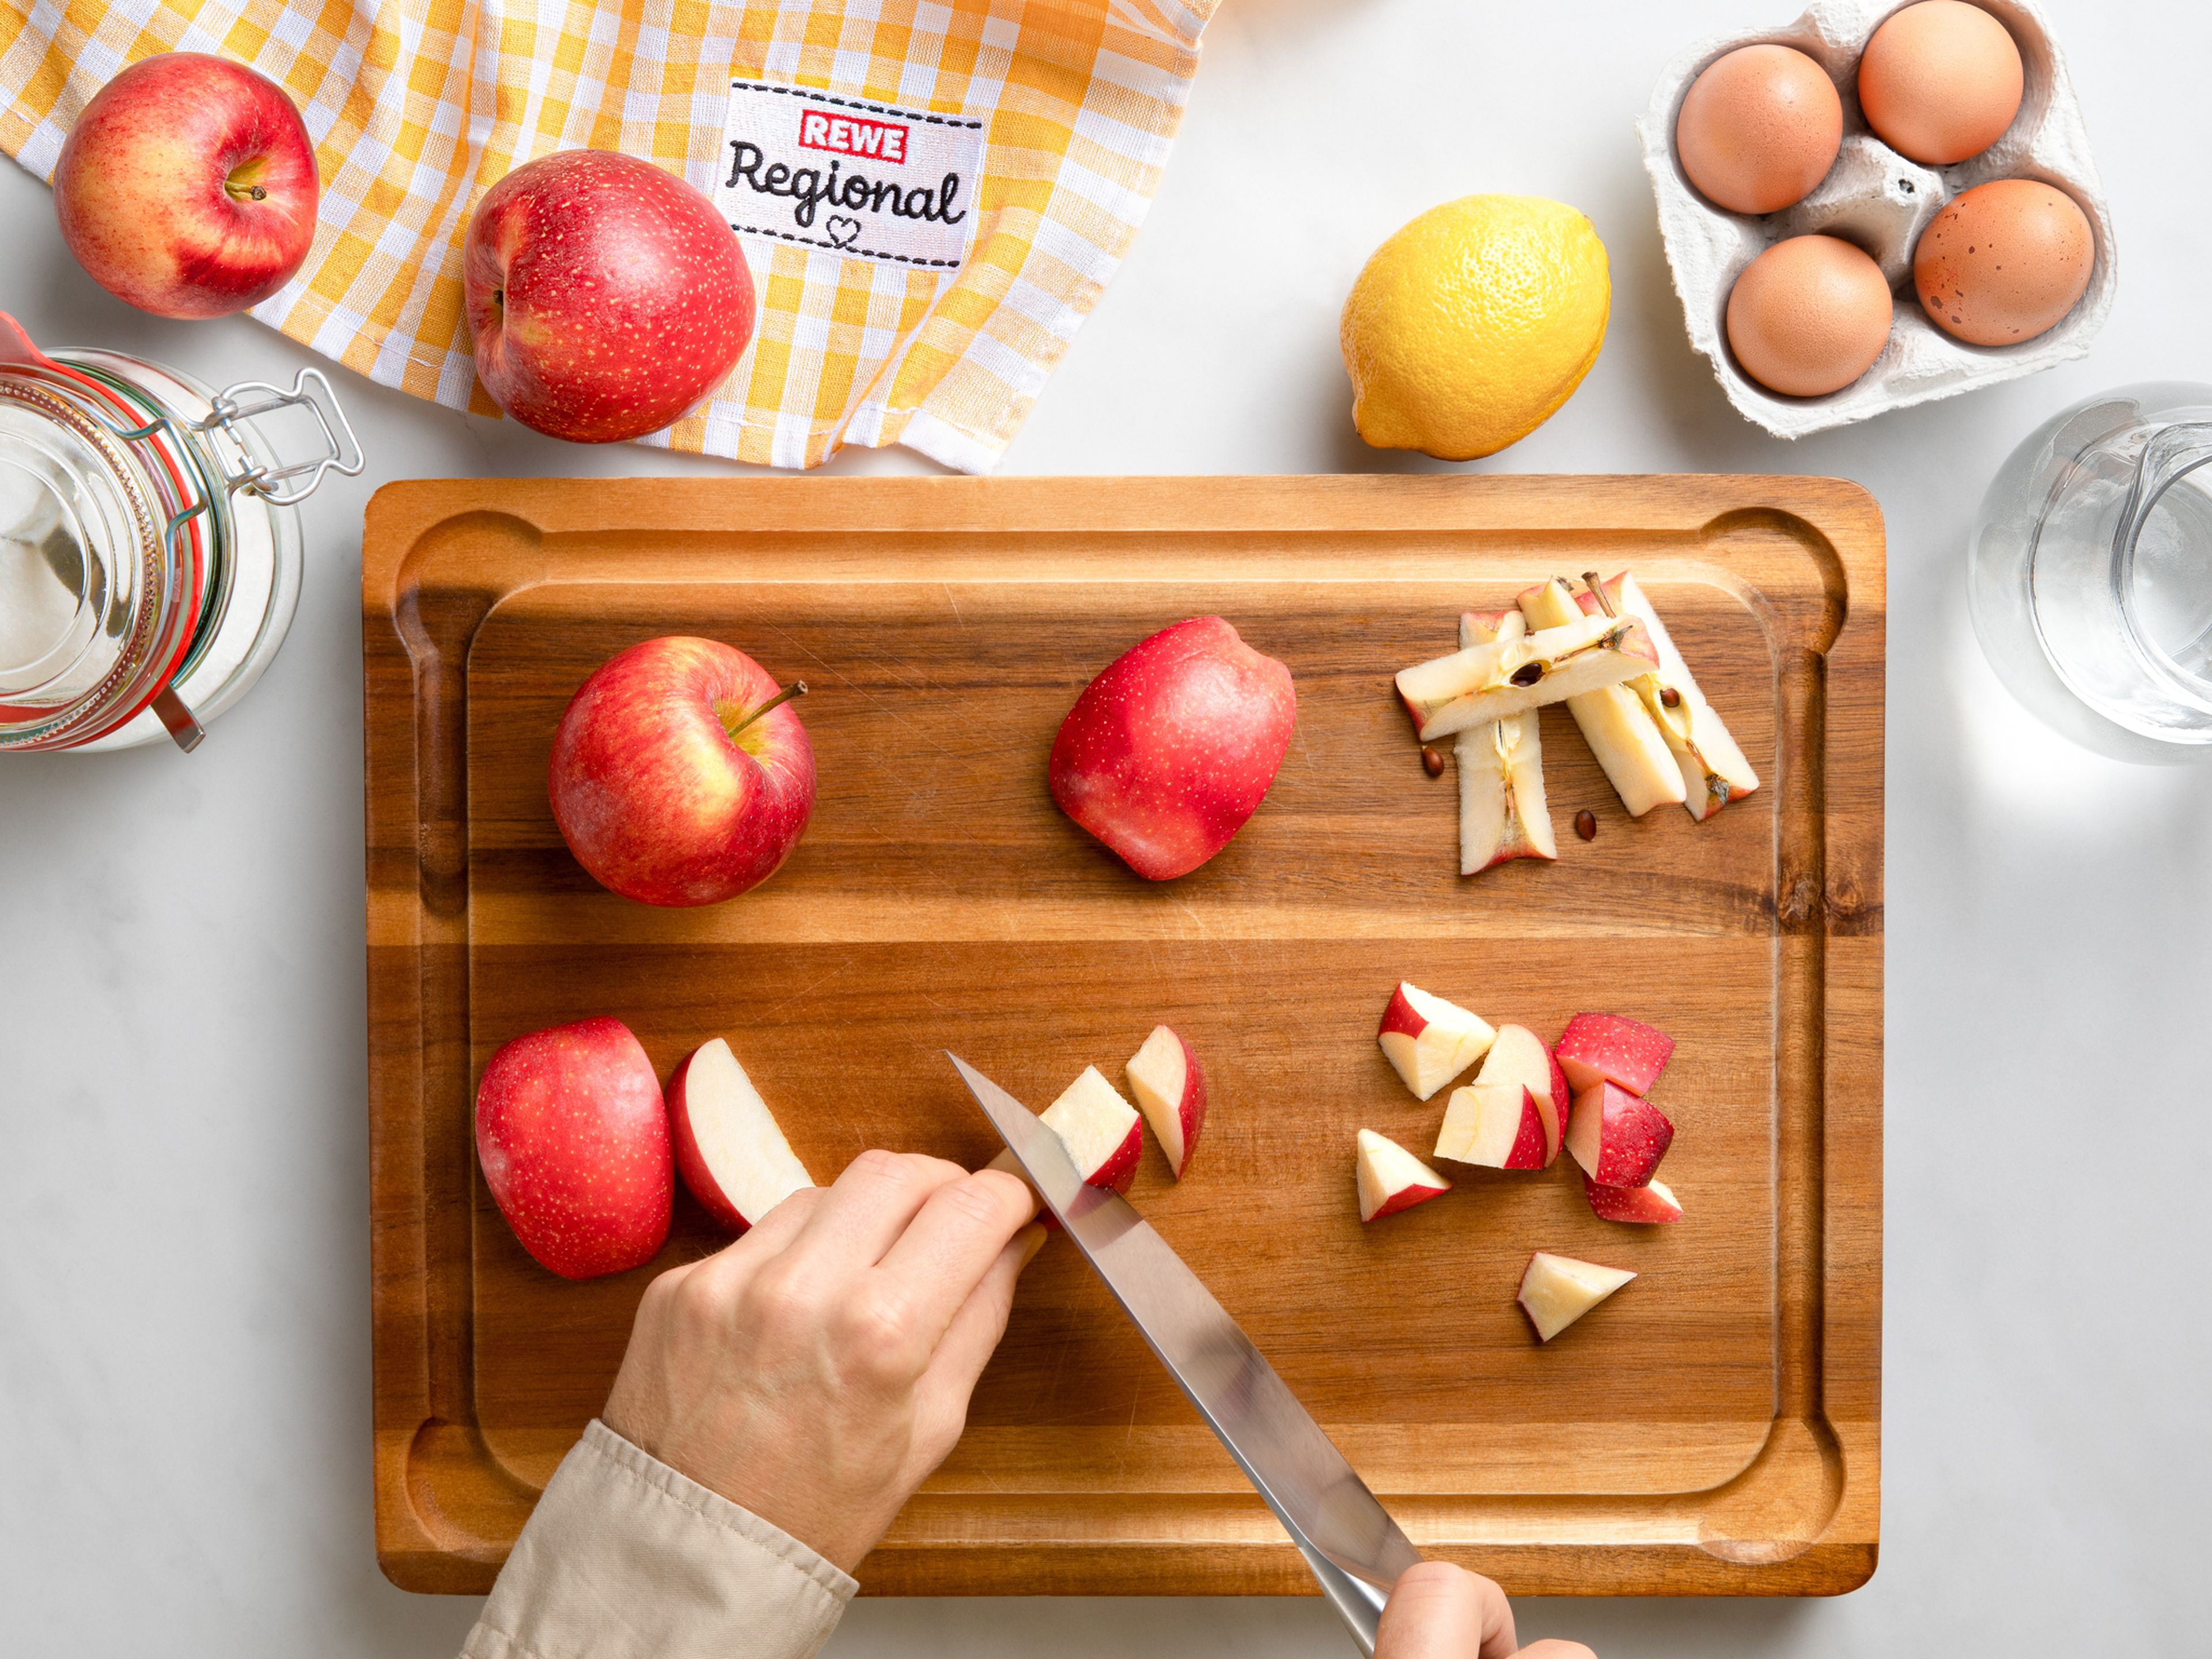 Soak almonds and raisins with apple juice for approx. 30 min. Wash, core and dice apples. Separate eggs, beat egg whites with sugar and salt until stiff and set aside.